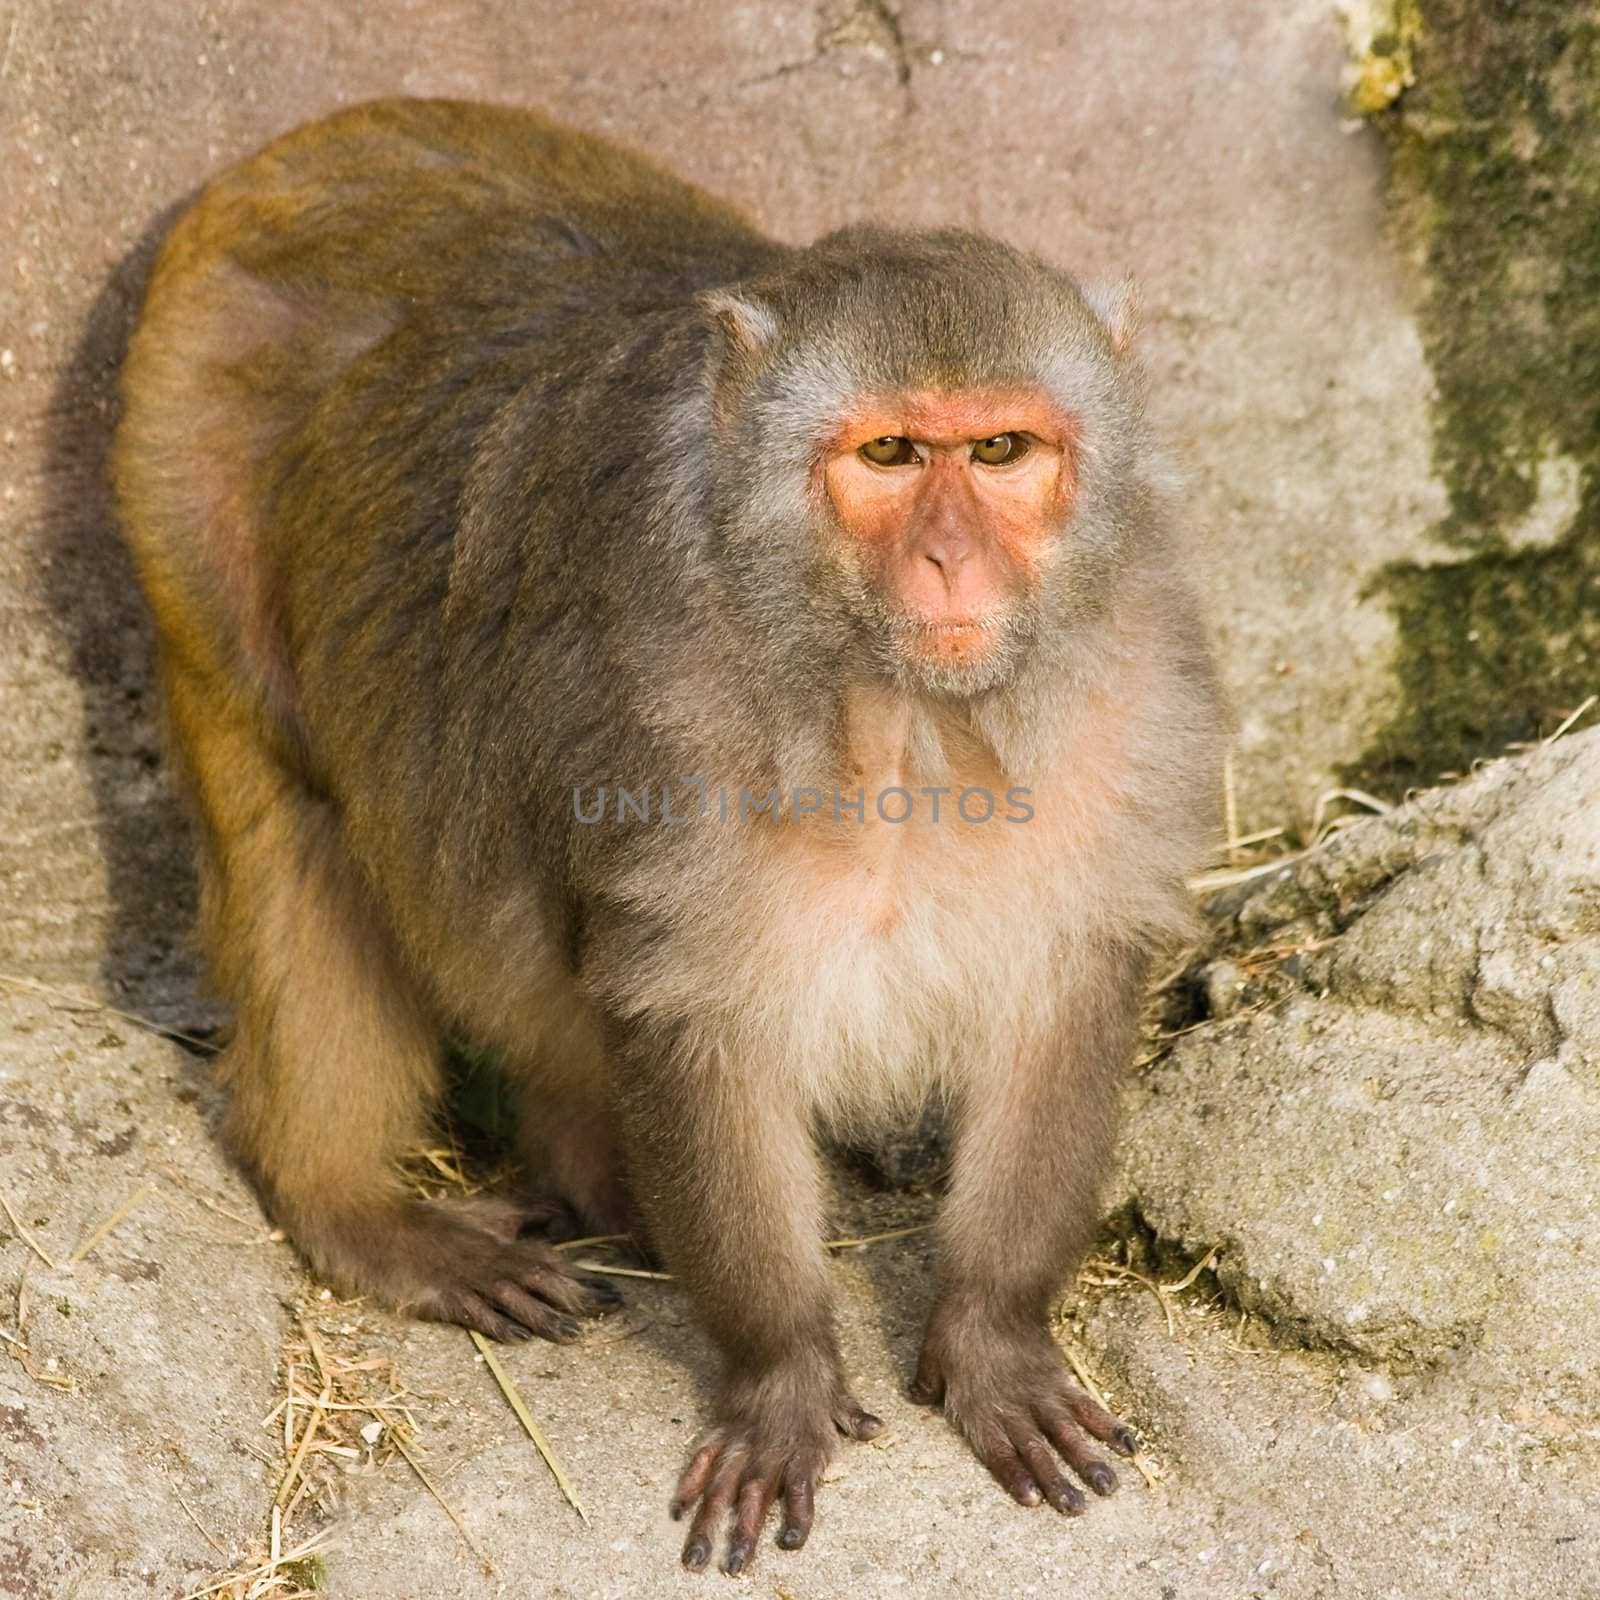 Rhesus monkey standing and staring - square cropped image